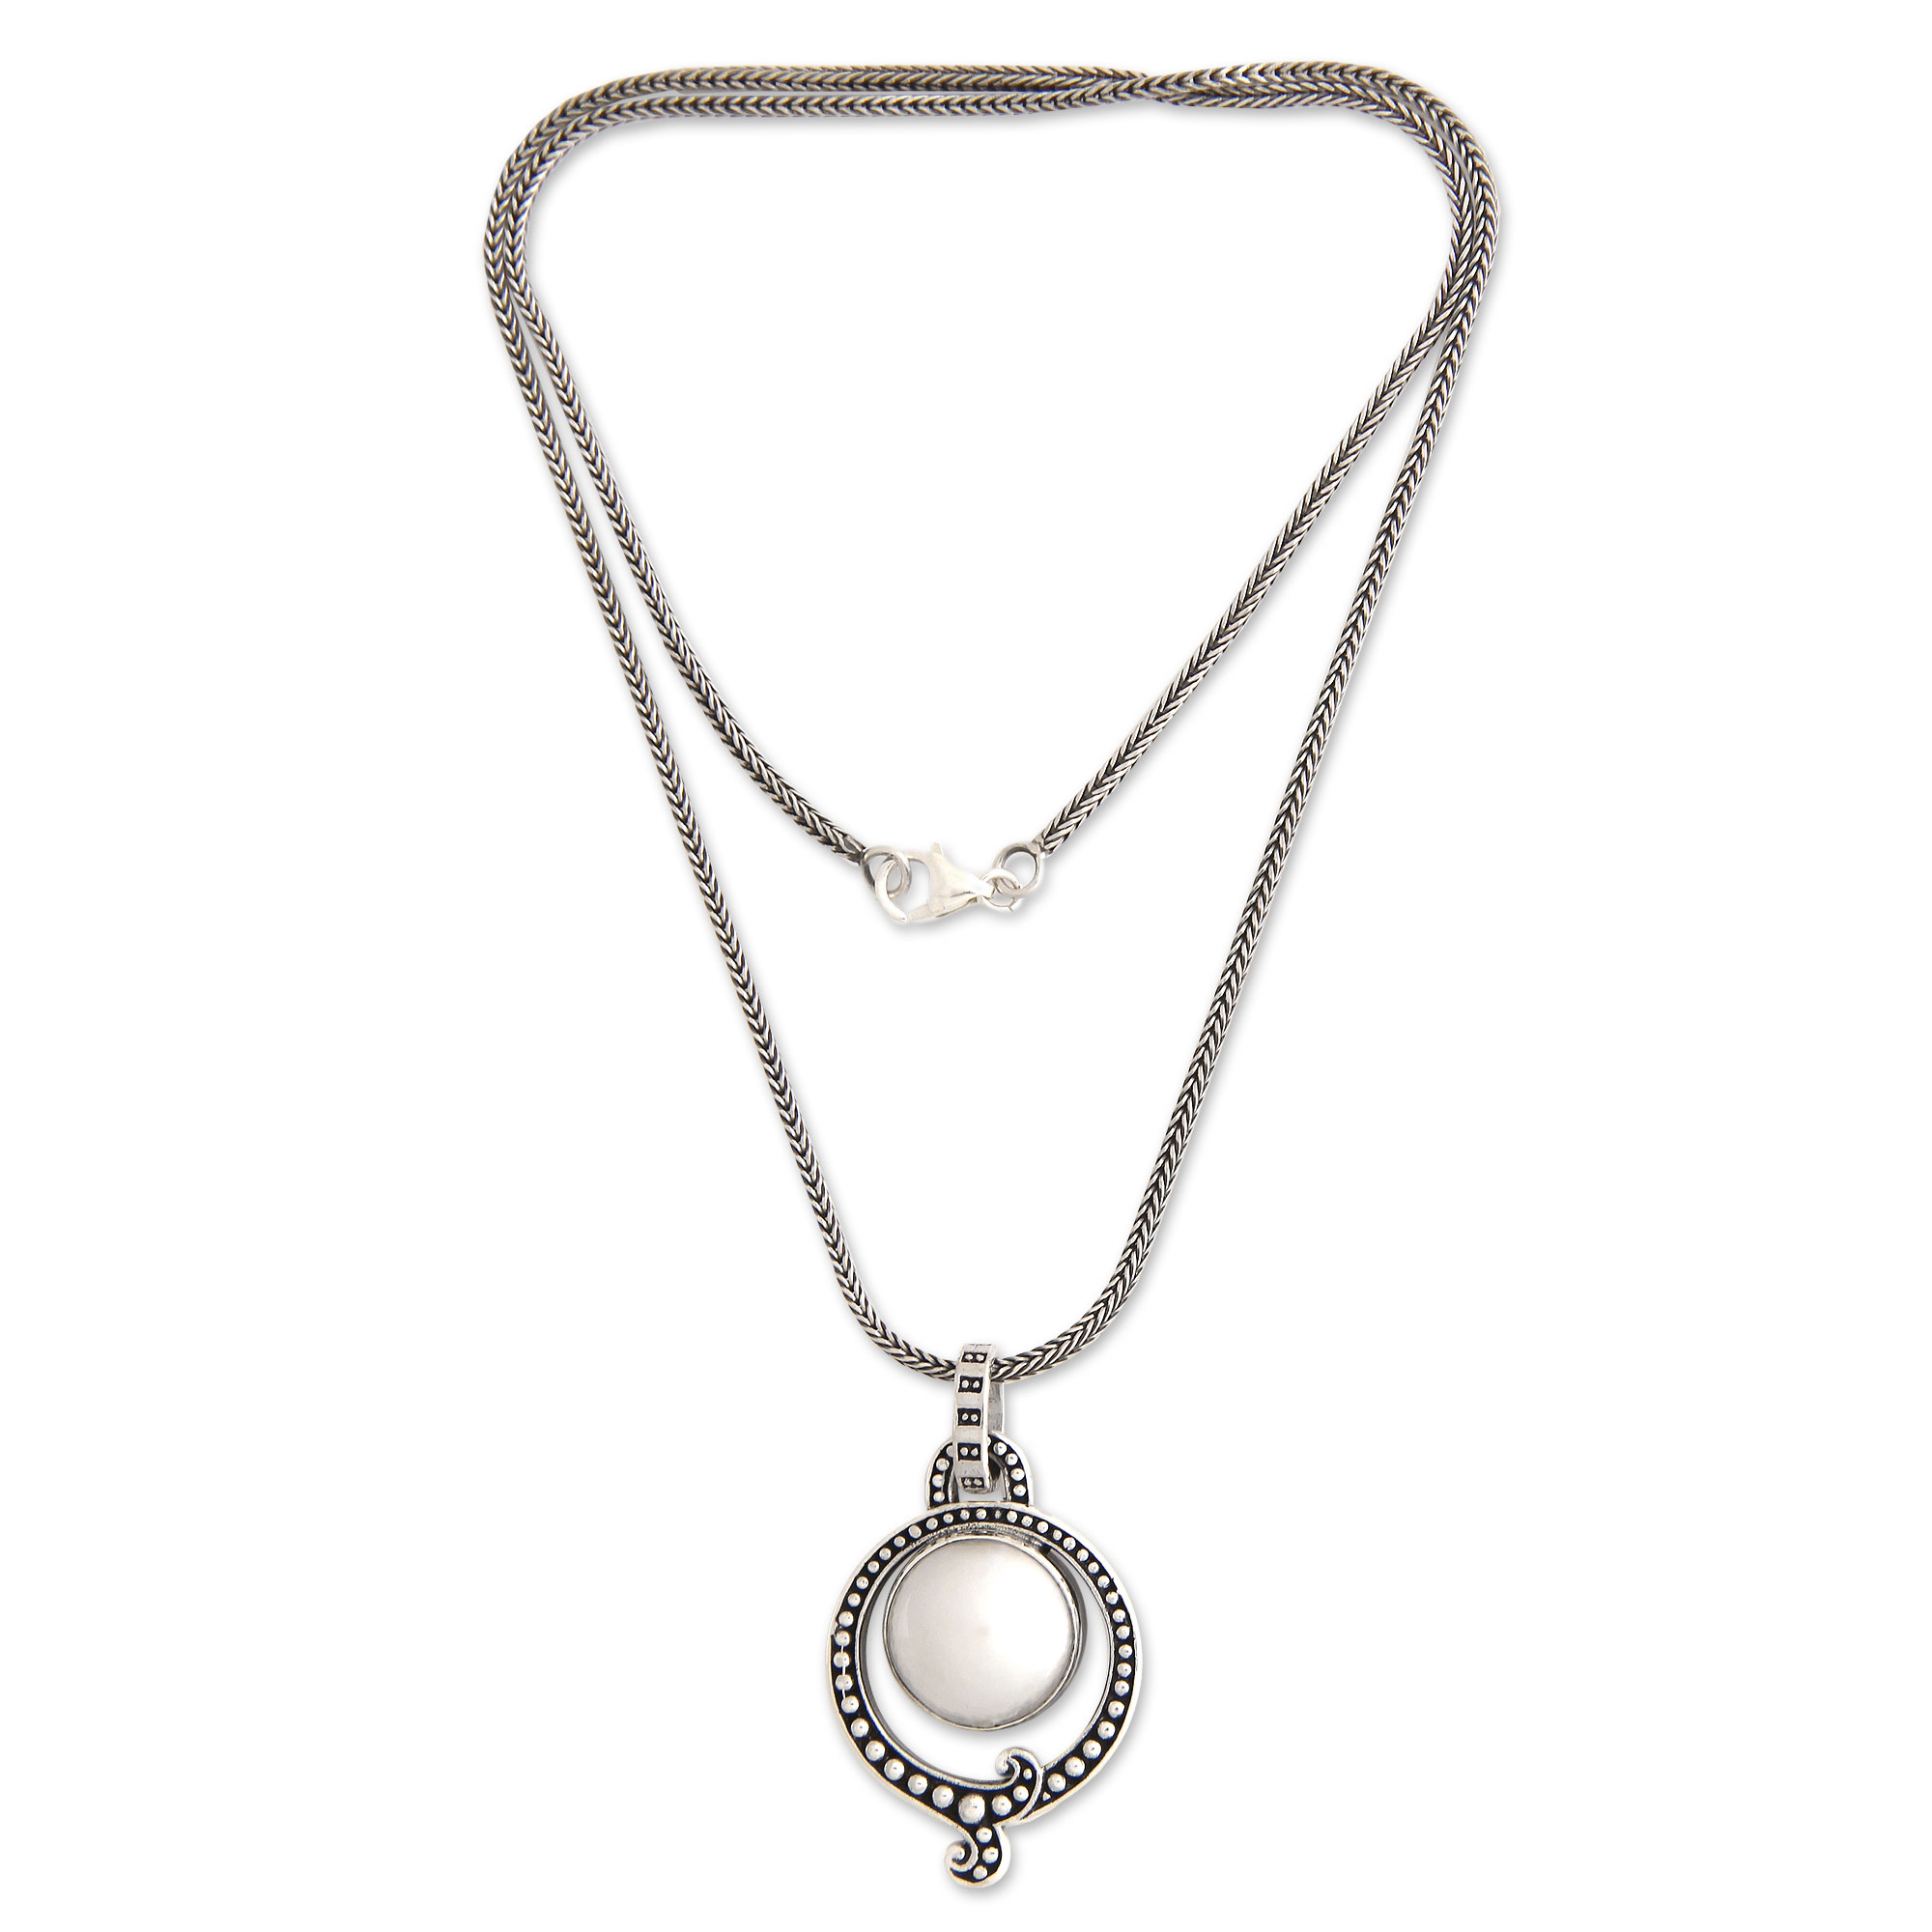 Handmade Pearl and Sterling Silver Necklace - Angel Halo | NOVICA